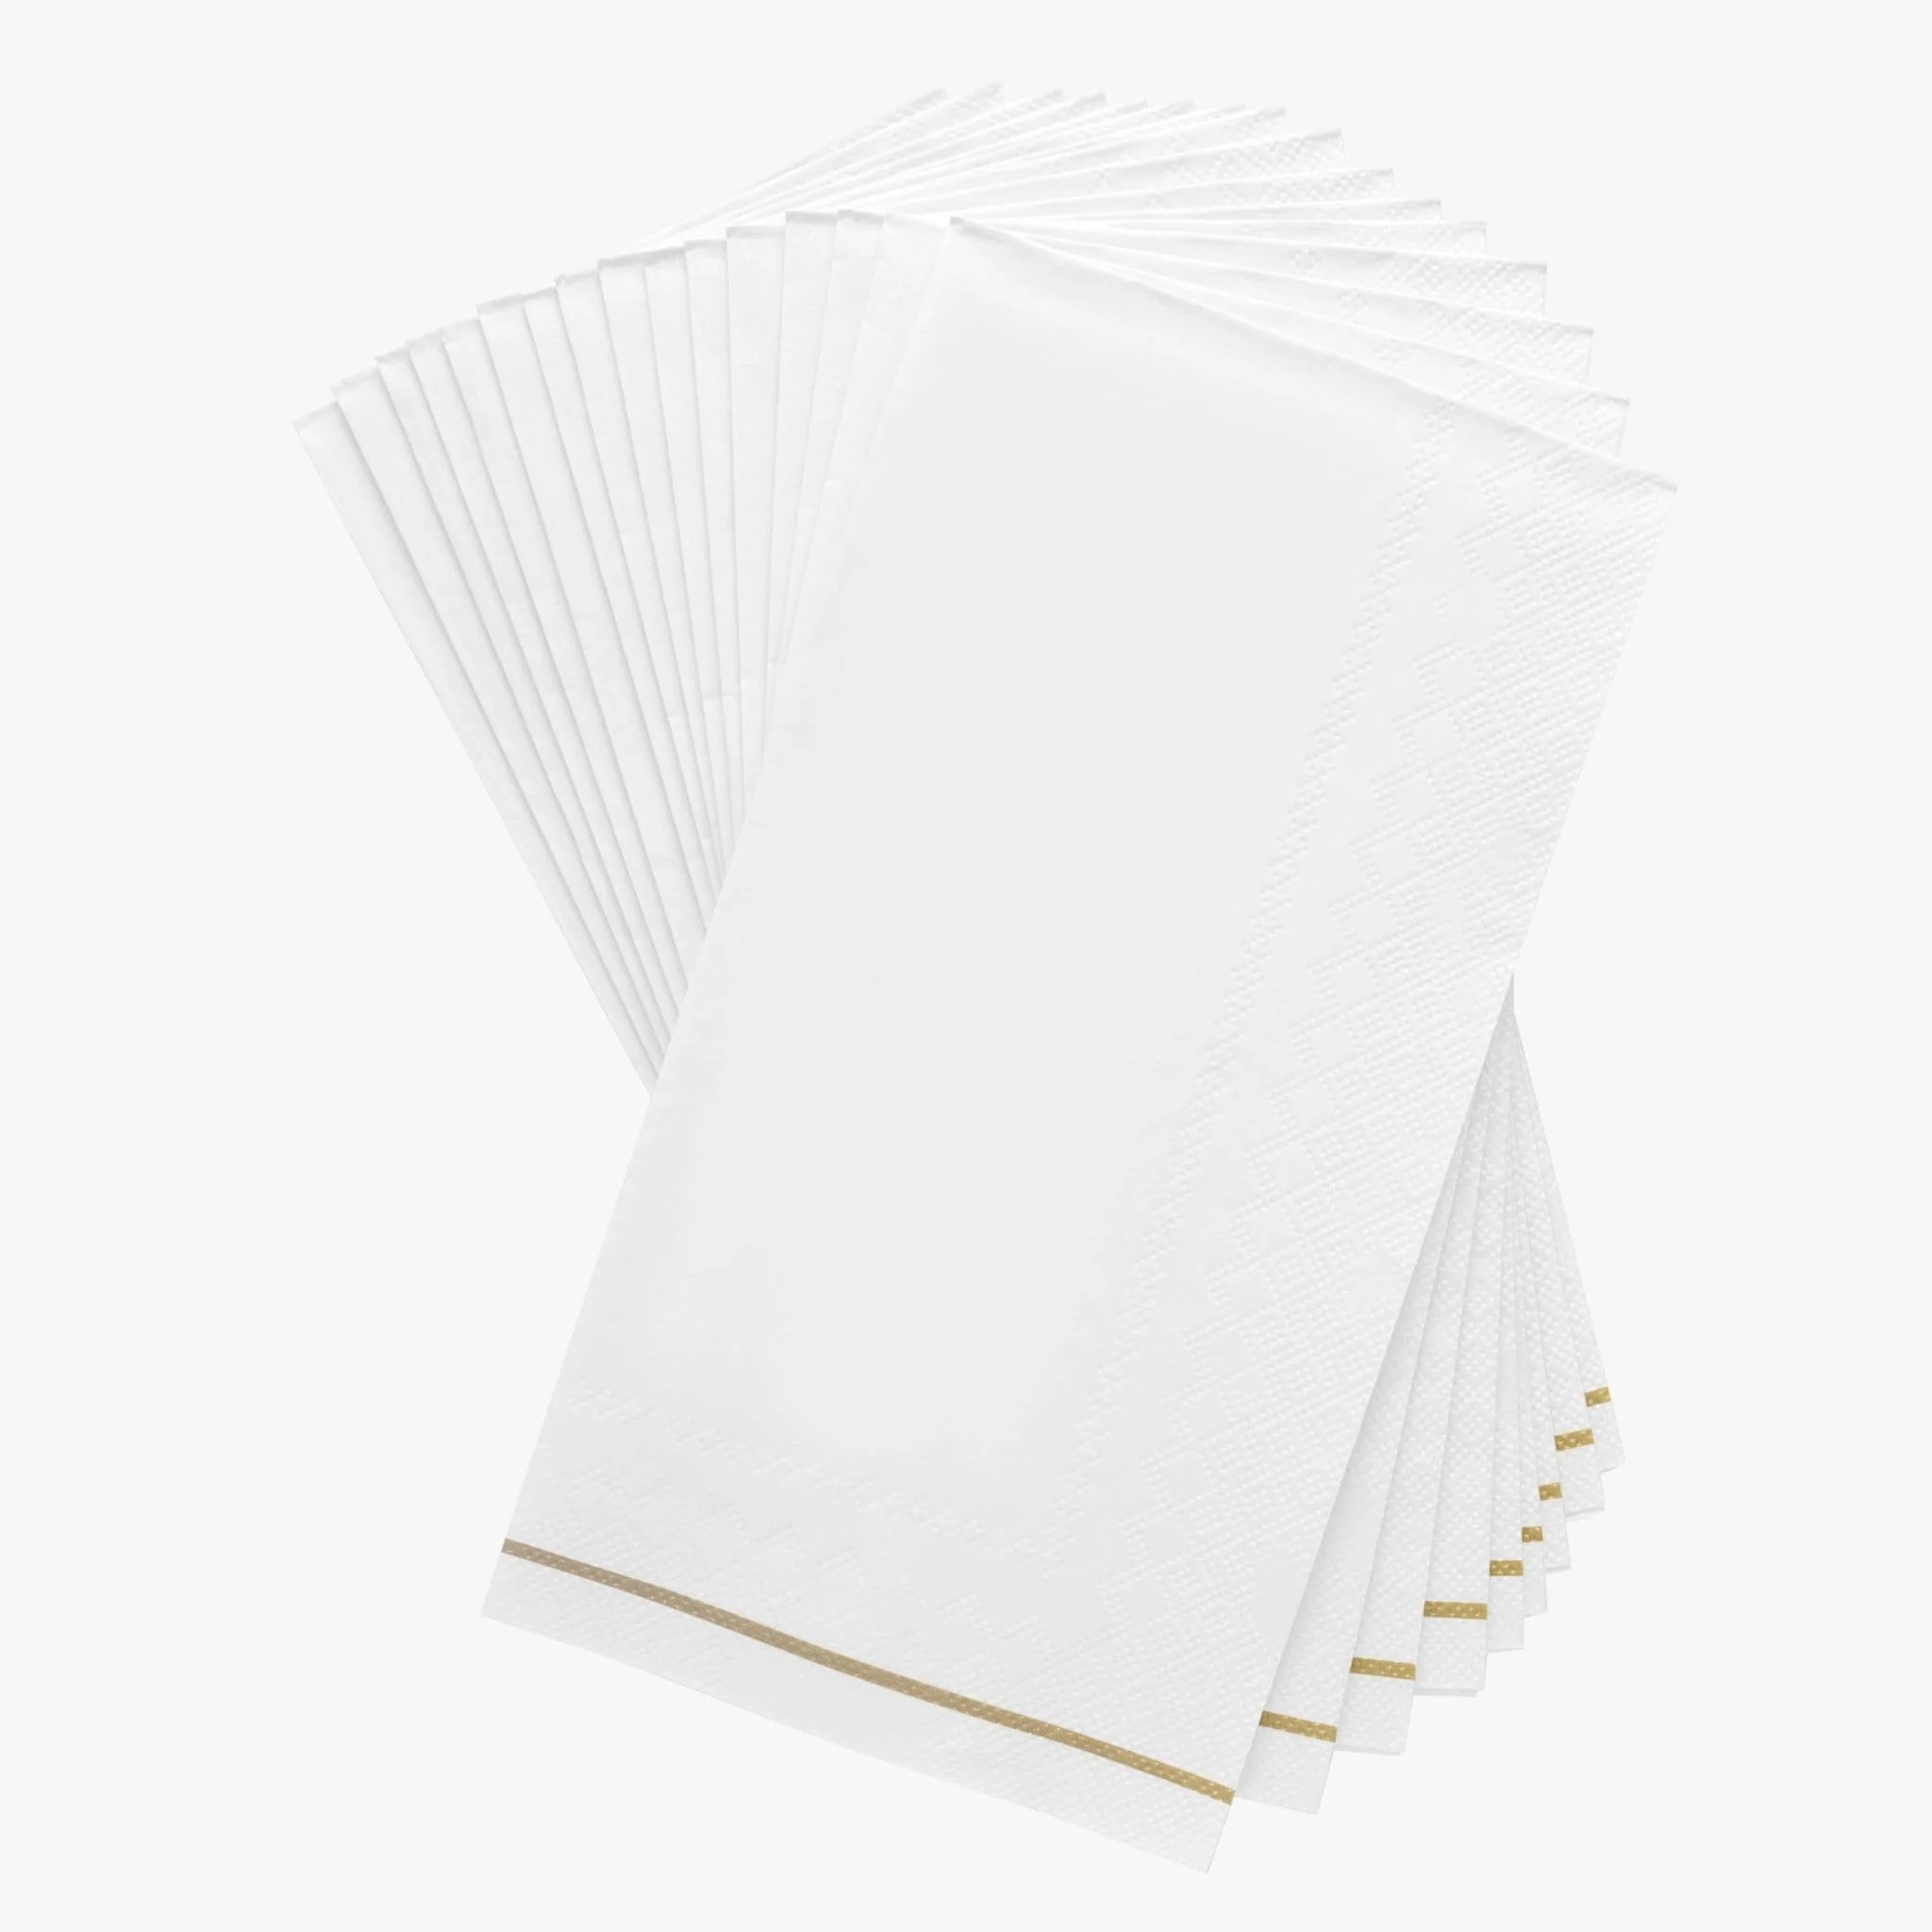 Luxe Party White with Gold Stripe Dinner Napkins - 16 pcs